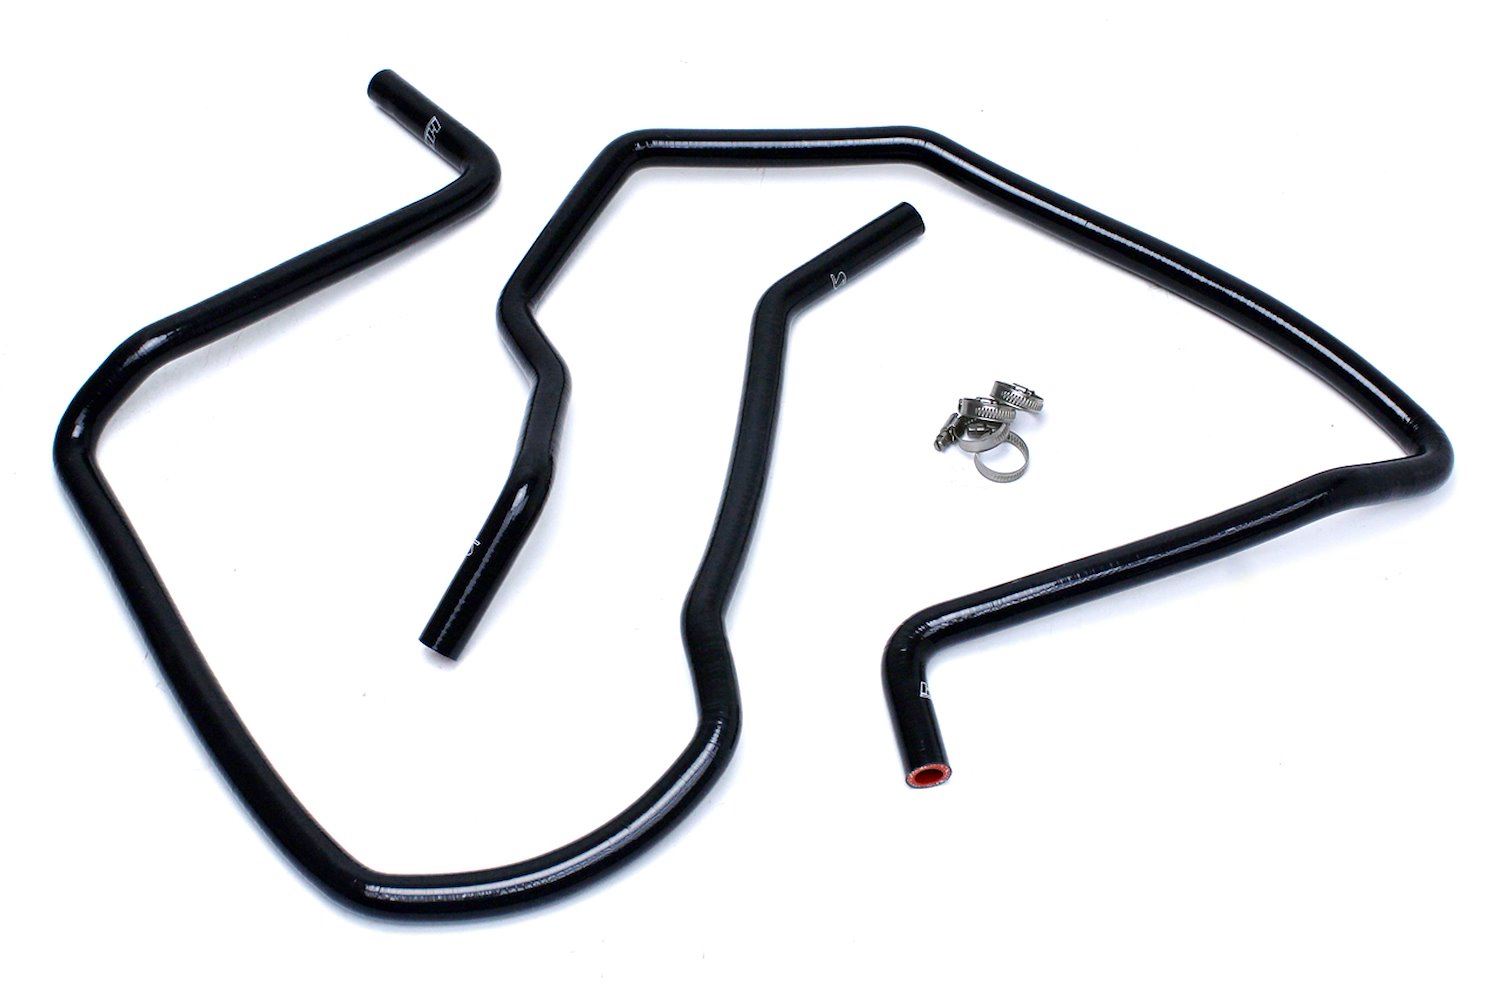 57-1498H-BLK Heater Hose Kit, High-Temp 3-Ply Reinforced Silicone, Replace OEM Rubber Heater Coolant Hoses